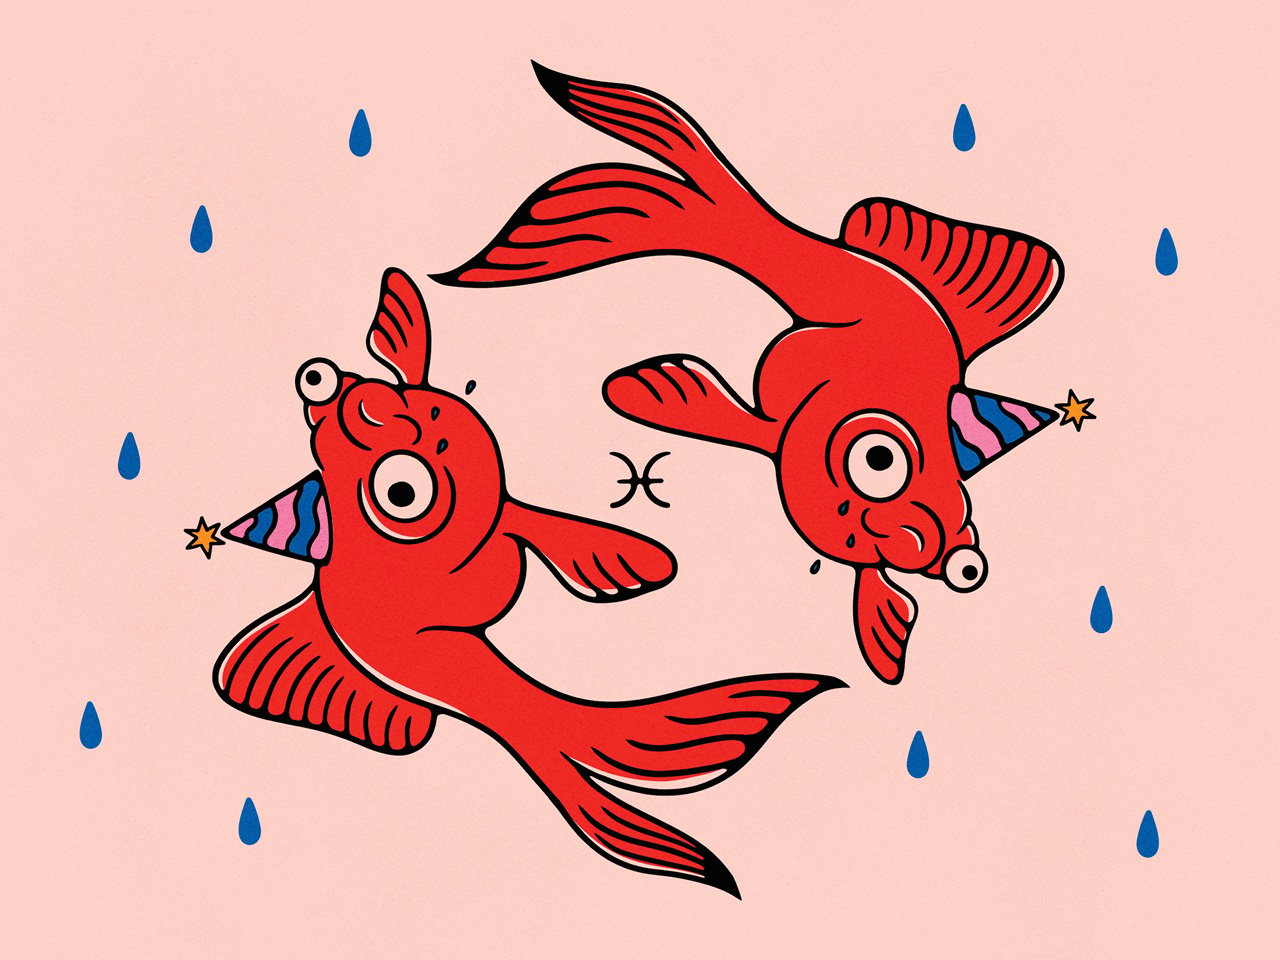 An illustration of twoo goldfish swimming around in a circle. the goldfish are wearing small party hats with pink and blue squiggly stripes and a gold star at the tip. In between the fish is the symbol for Pisces.